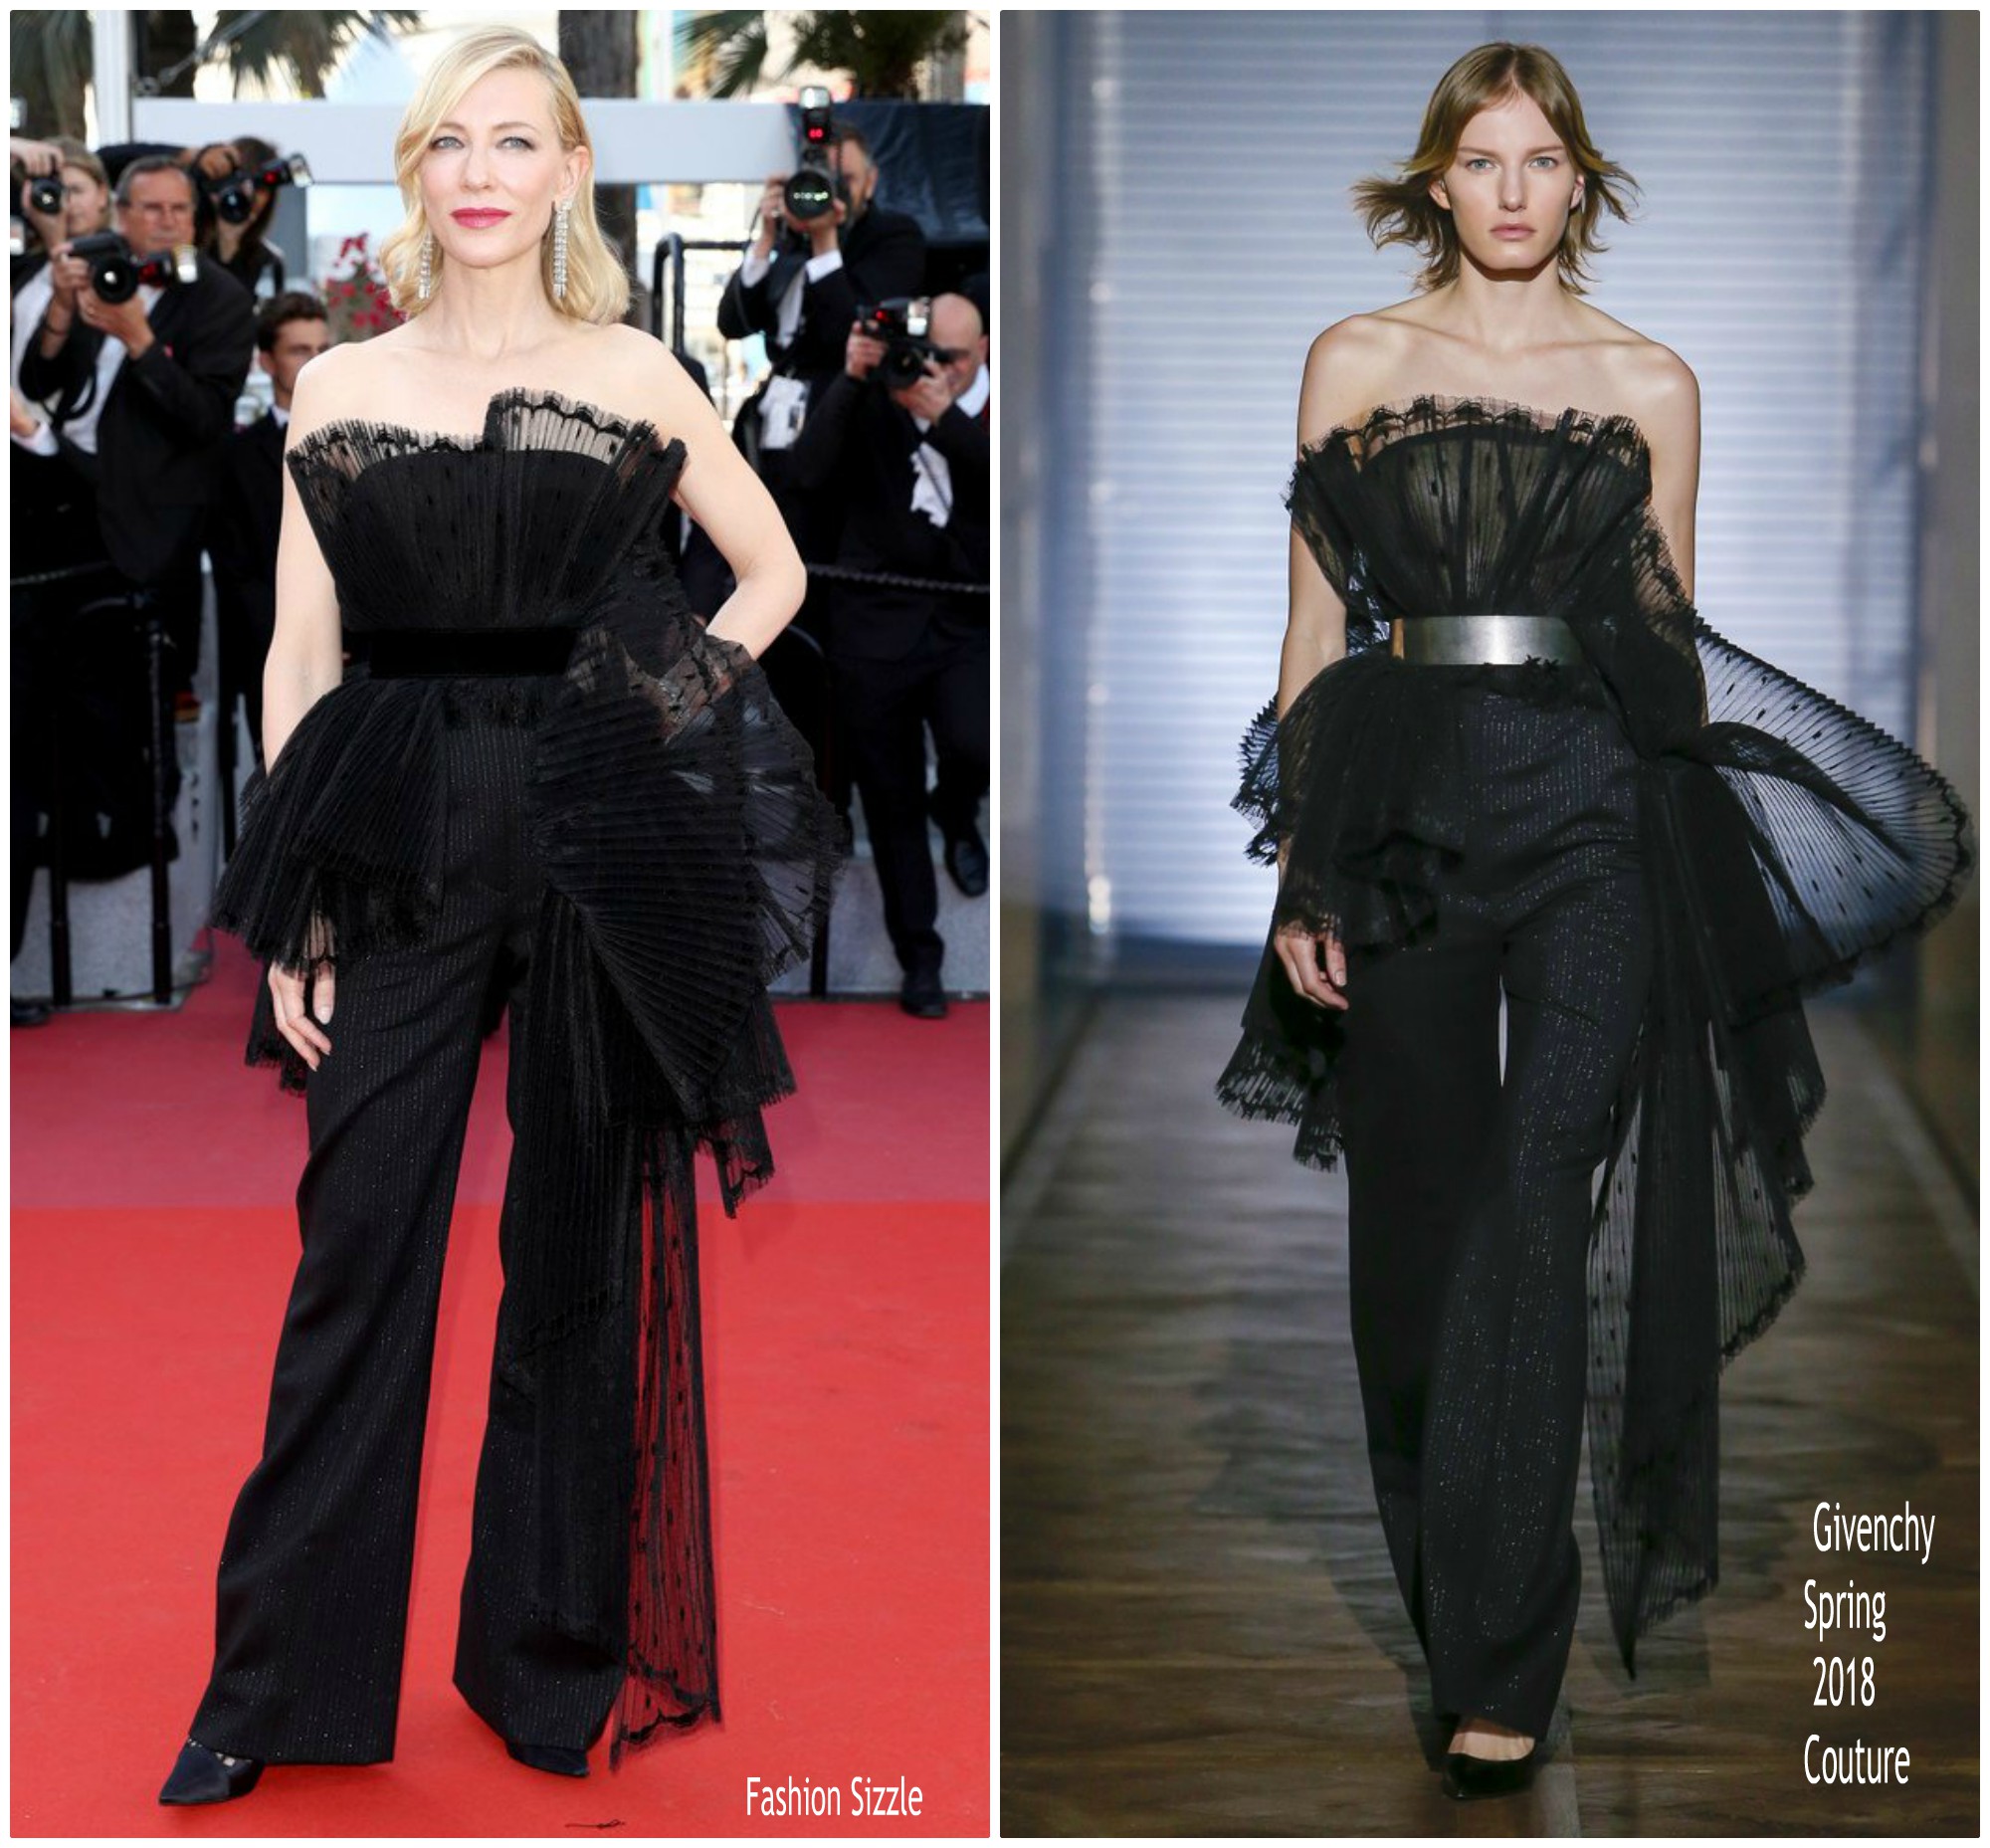 cate-blanchett-in-givenchy-haute-couture-capharnaum-cannes-film-festival-premiere